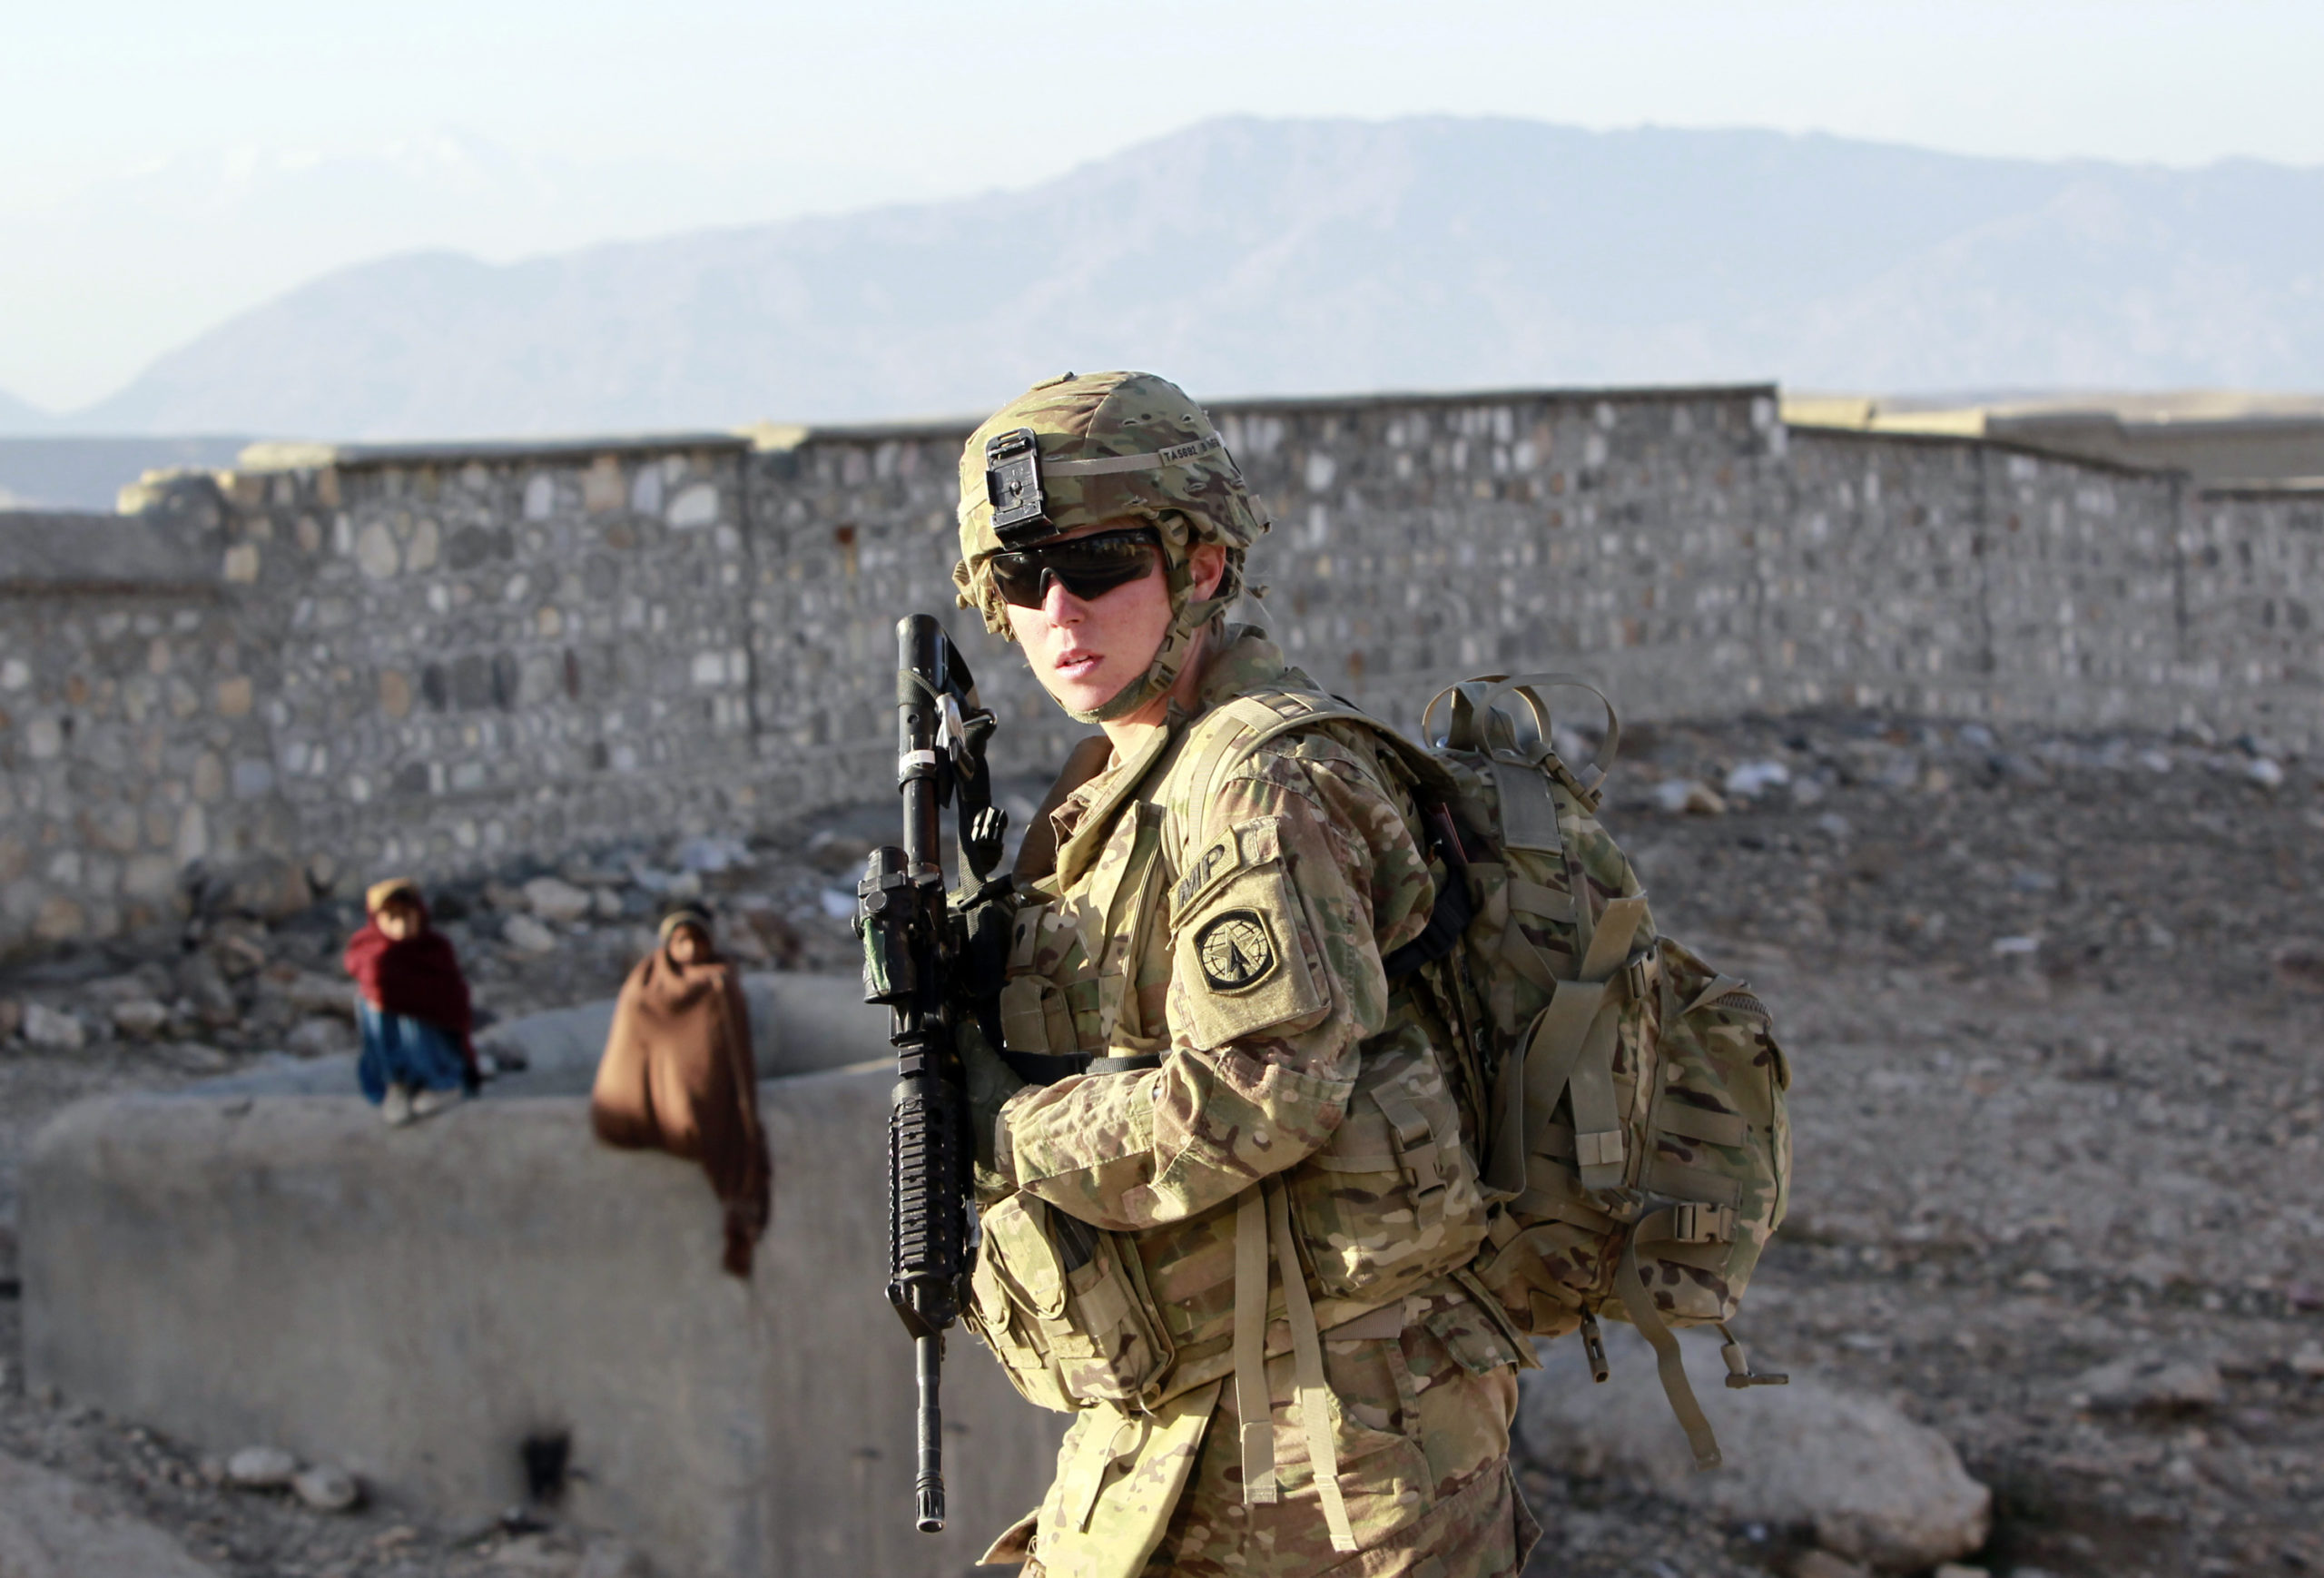 SPC Erica Taliaferro, a U.S. female soldier from 549th MP Company, Task Force Bronco patrols in Pachir wa Agam district in Nangarhar province, eastern Afghanistan March 5, 2012. REUTERS/Erik De Castro